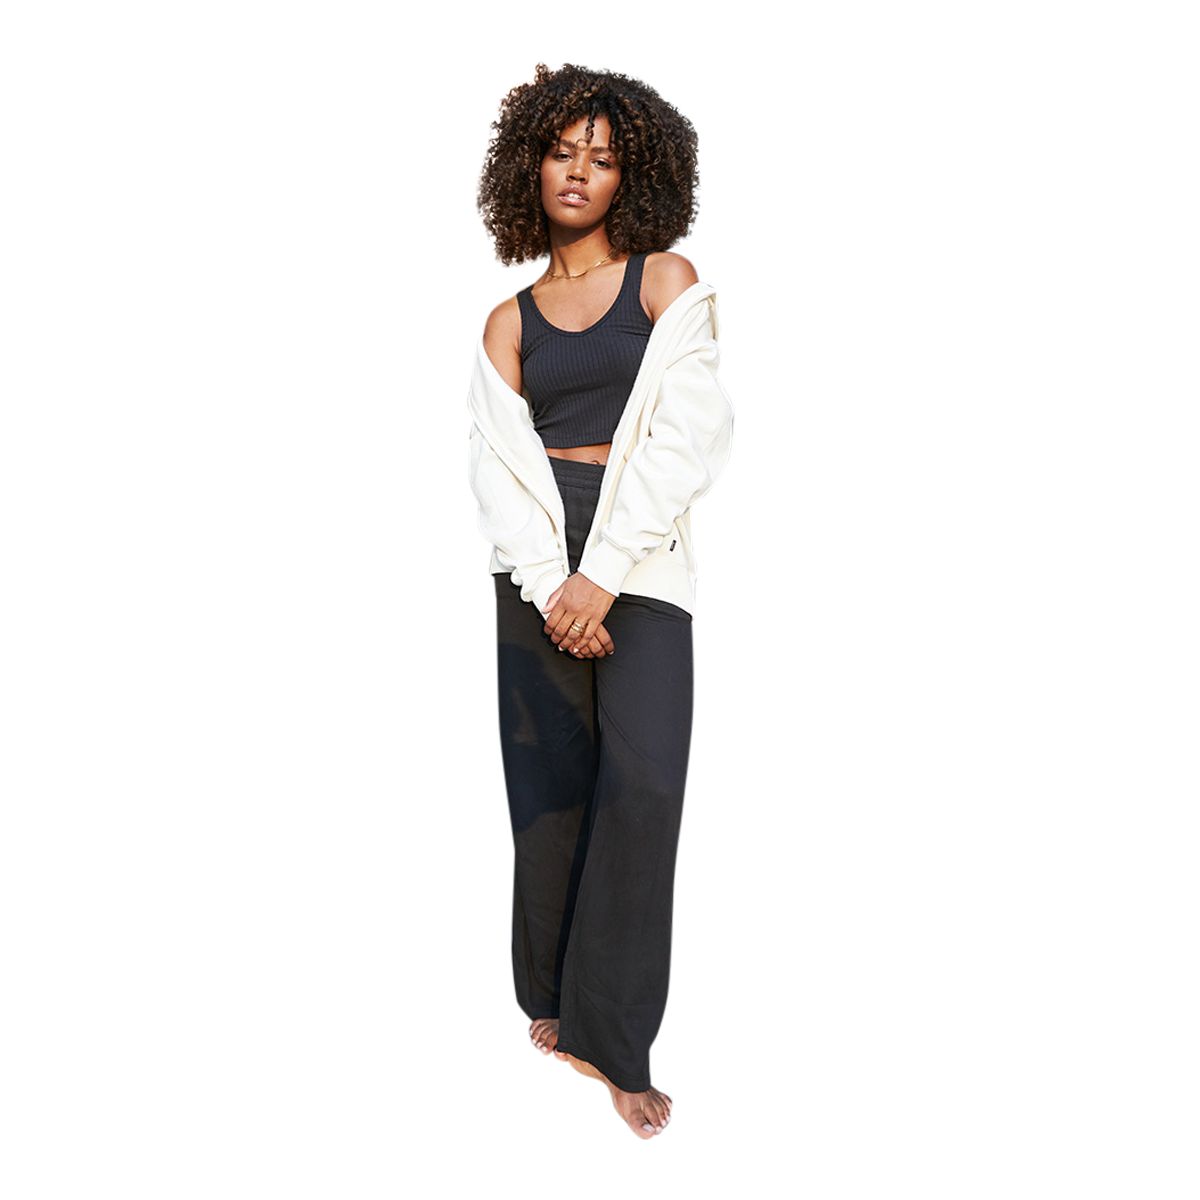 https://media-www.sportchek.ca/product/div-03-softgoods/dpt-72-casual-clothing/sdpt-02-womens/334030621/tentree-women-s-tencel-wide-leg-pants-27e225fe-7235-459a-868f-1dfd00baadee-jpgrendition.jpg?imdensity=1&imwidth=1244&impolicy=mZoom